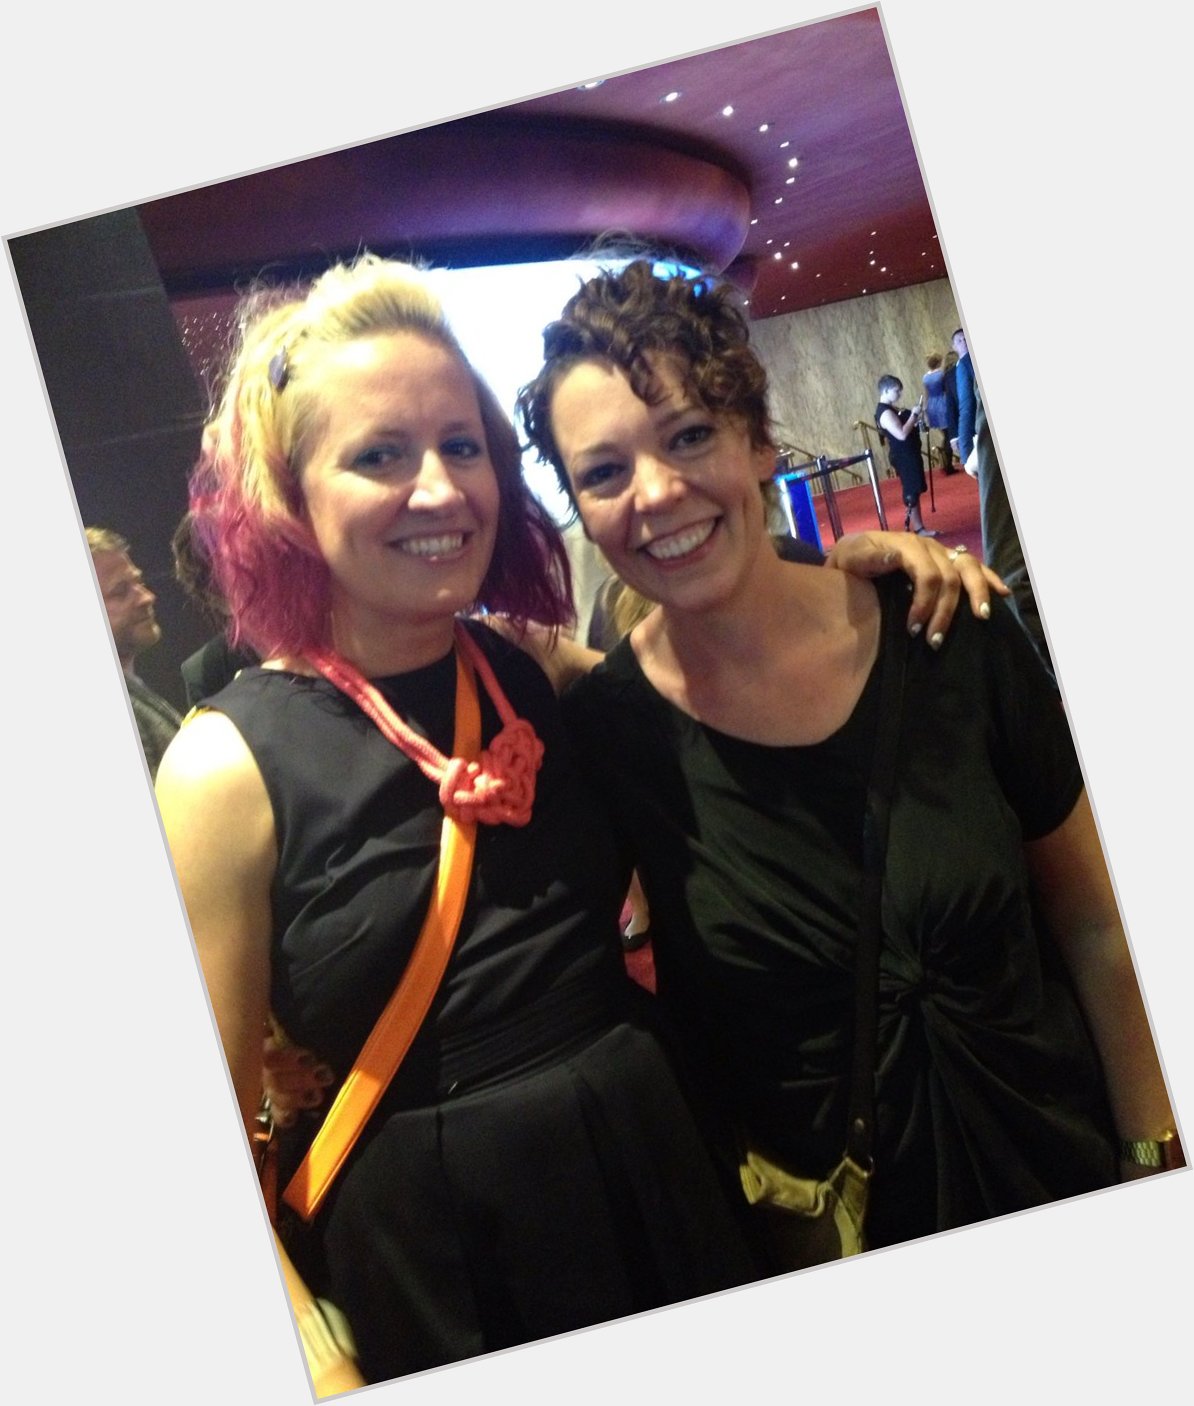 Happy birthday Olivia Colman!! It was an absolute pleasure to meet her back in 2013!! 